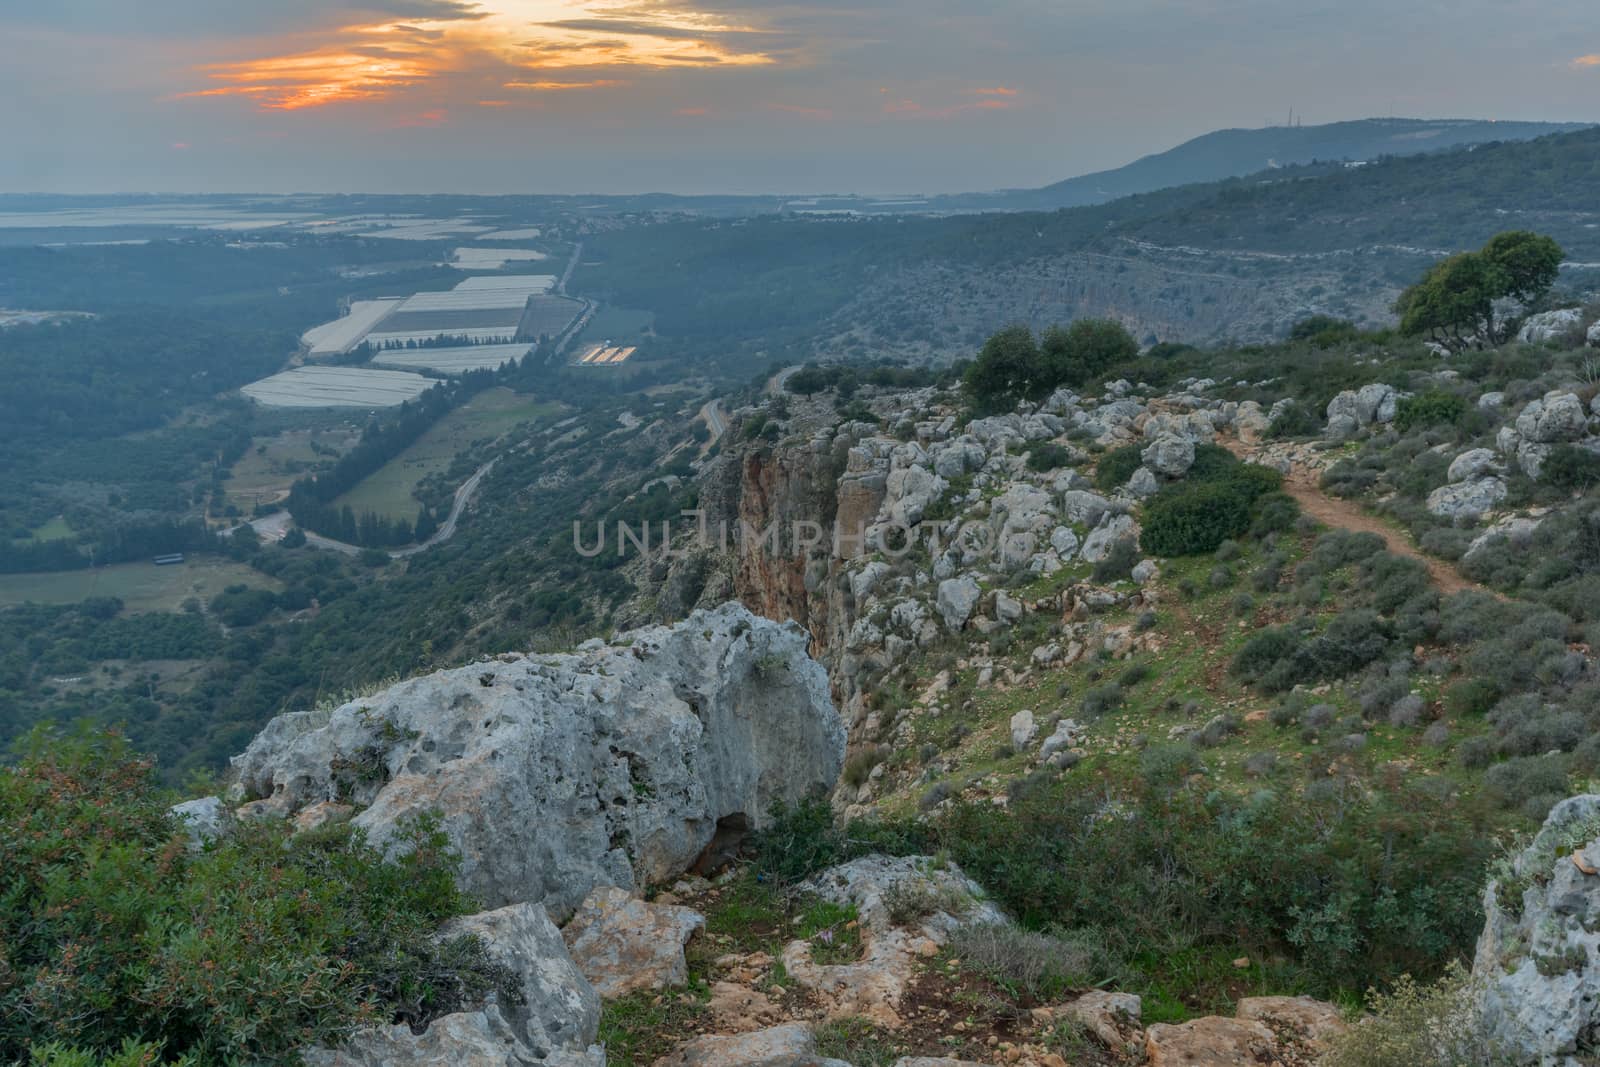 Sunset view of Western Galilee landscape, with the Mediterranean Sea, in Adamit Park, Northern Israel